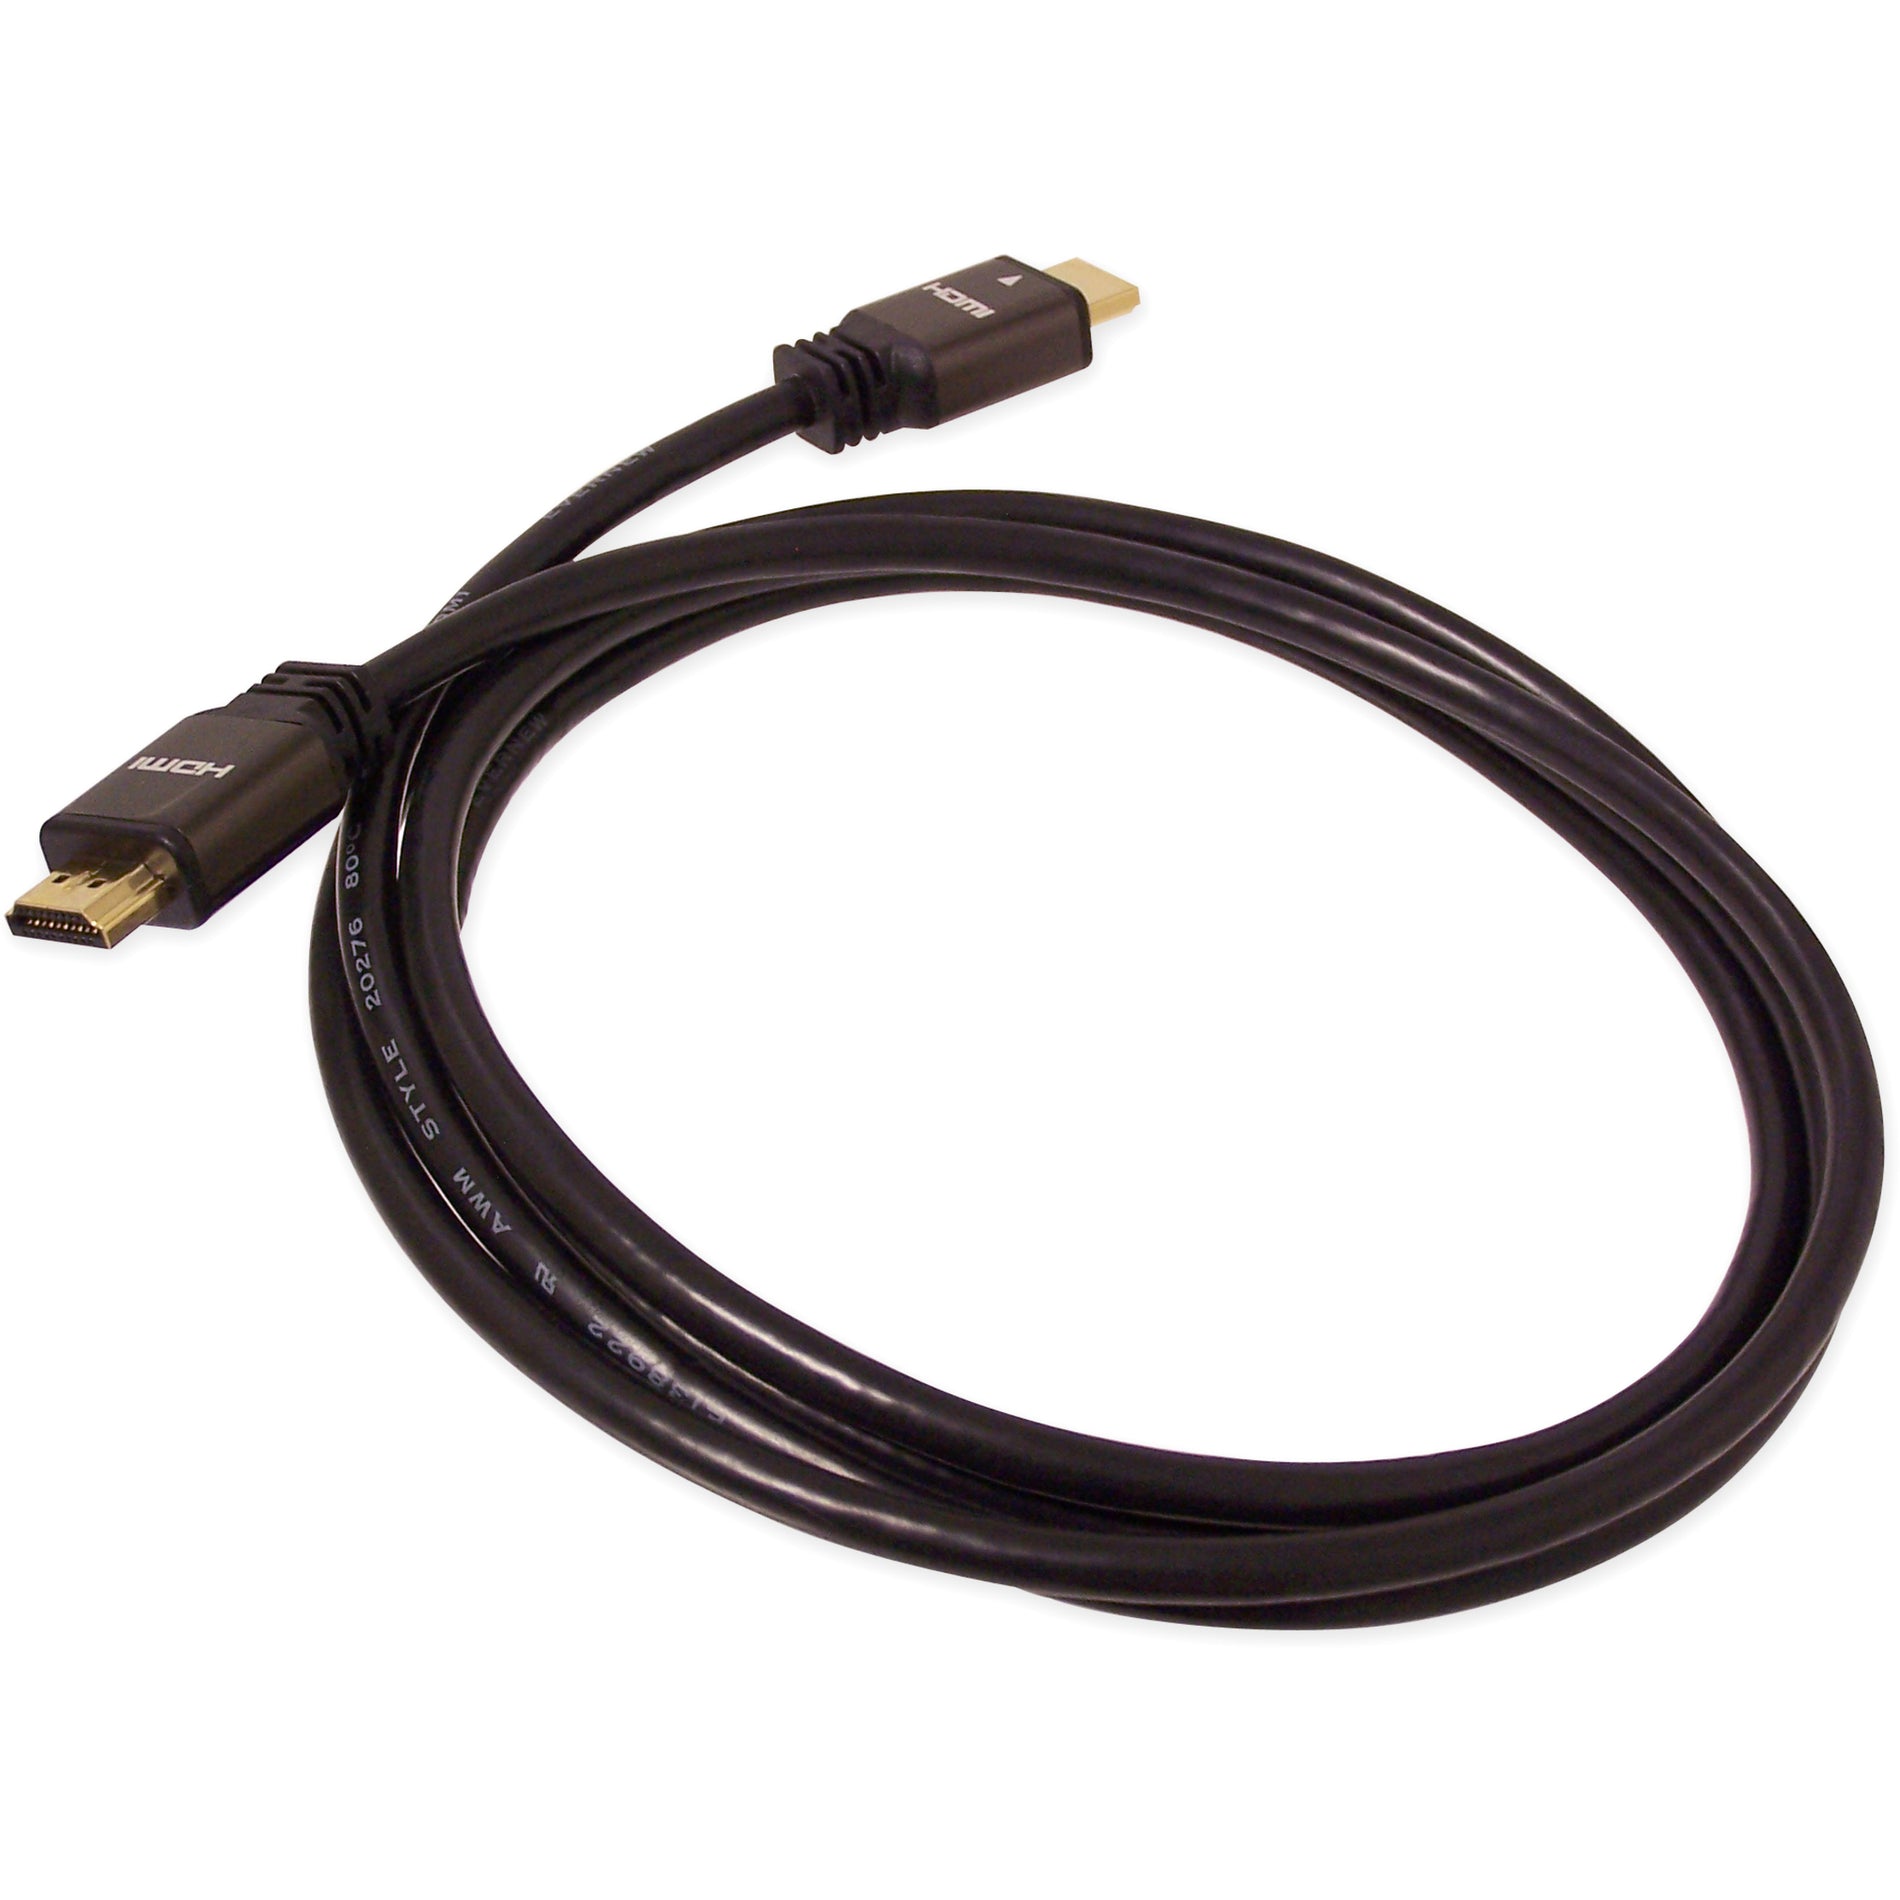 SIIG CB-000012-S1 HDMI Cable, 6.56 ft, Molded, Copper Conductor, Shielded, Gold Plated Connectors